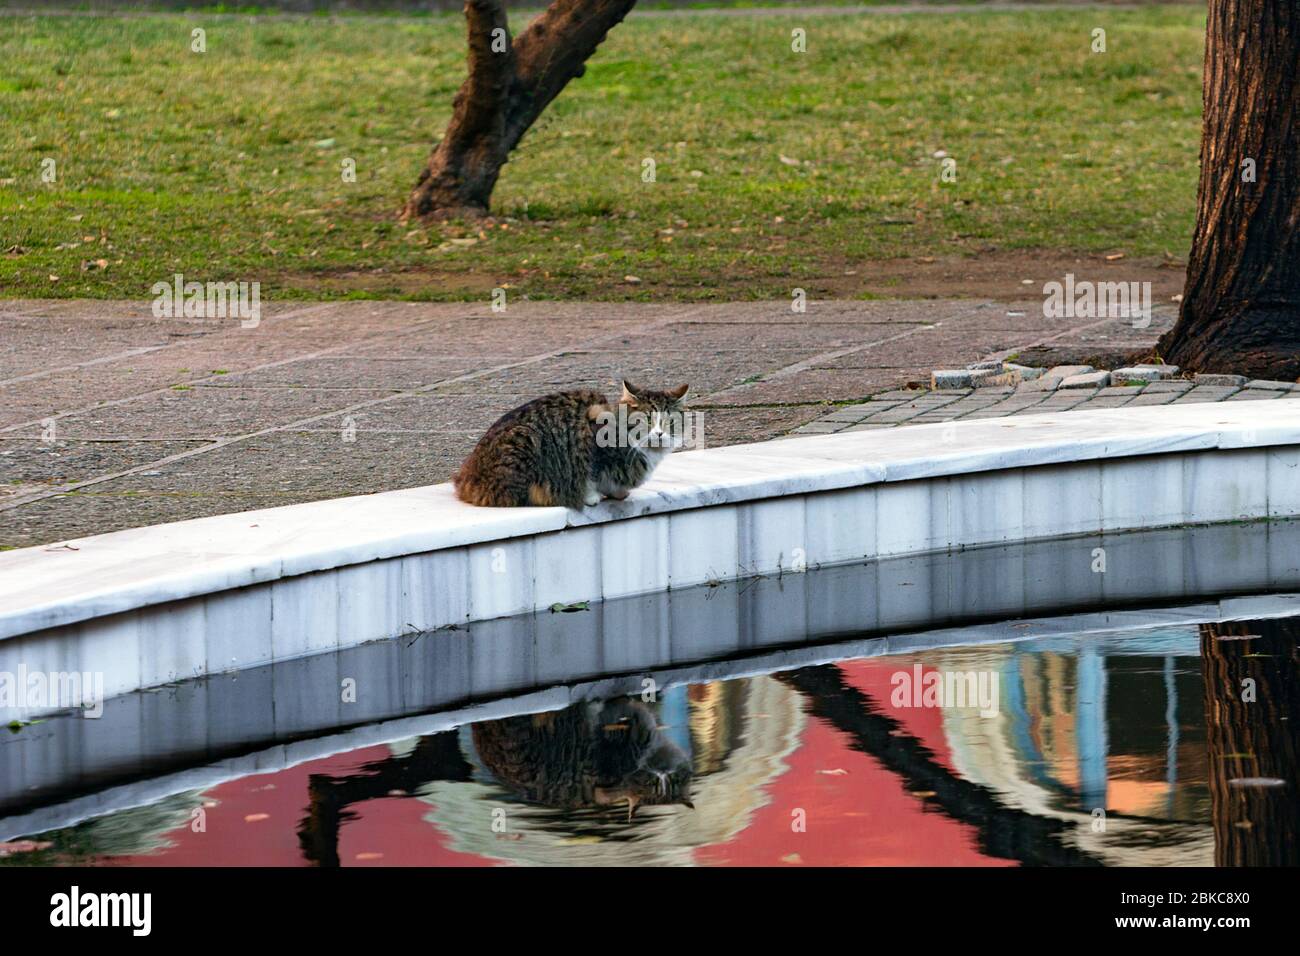 Central perspective image of a tabby cat looking at lens, sitting by a nice decorative pool with reflection. Stock Photo